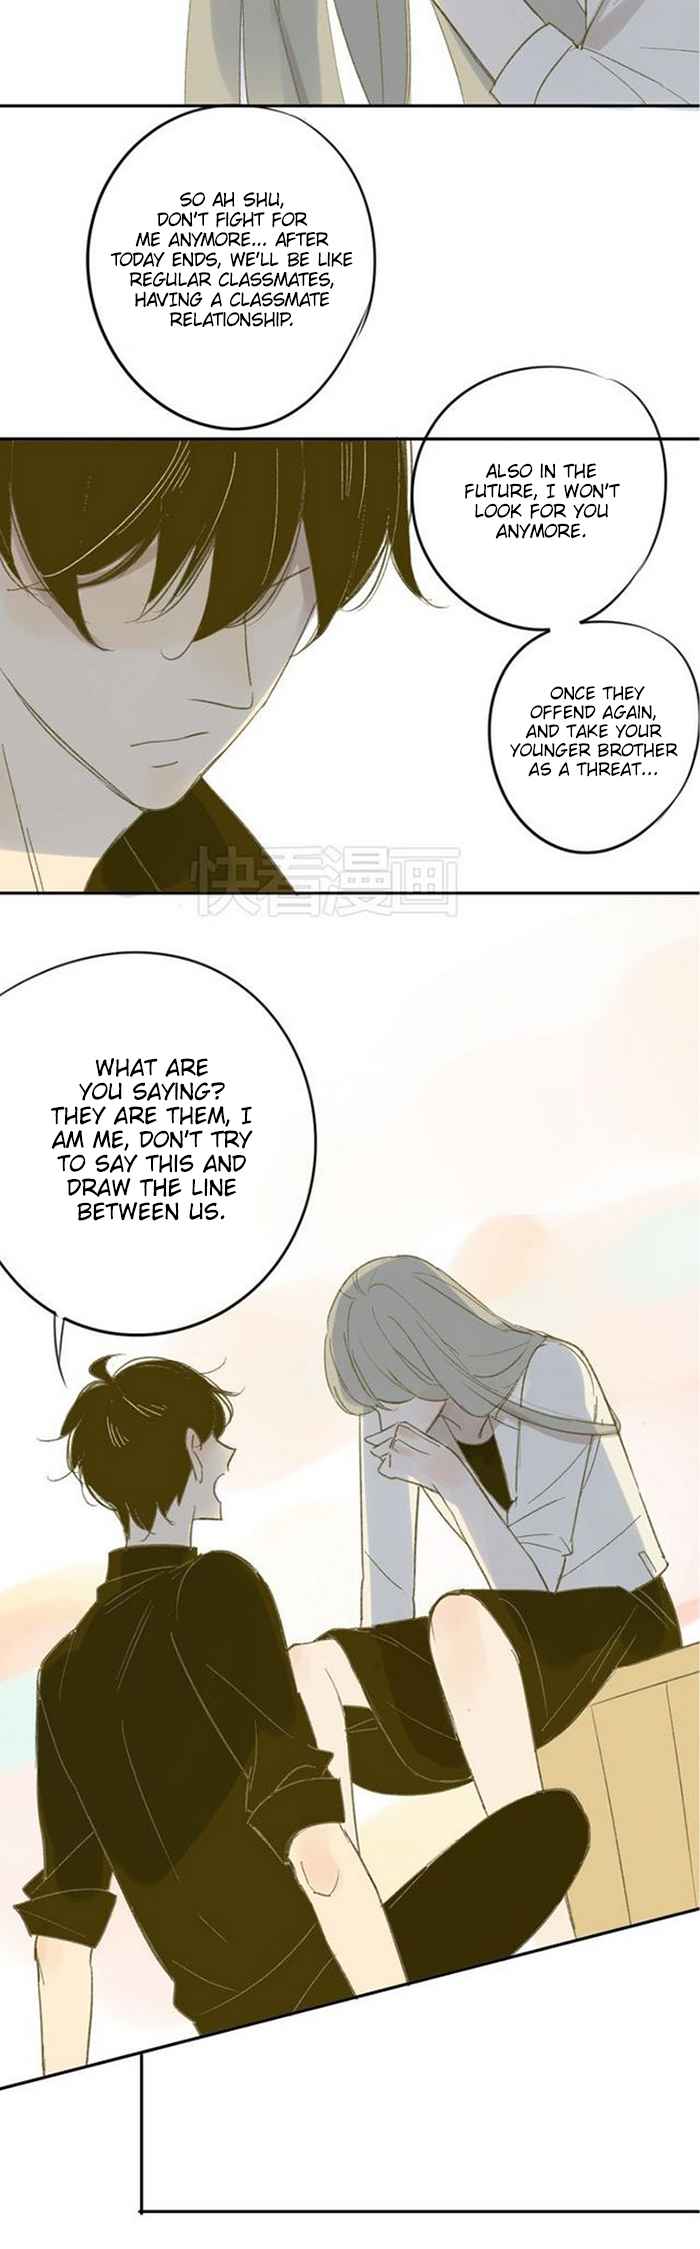 Classmate Relationship? Ch. 60 What does he want to say?